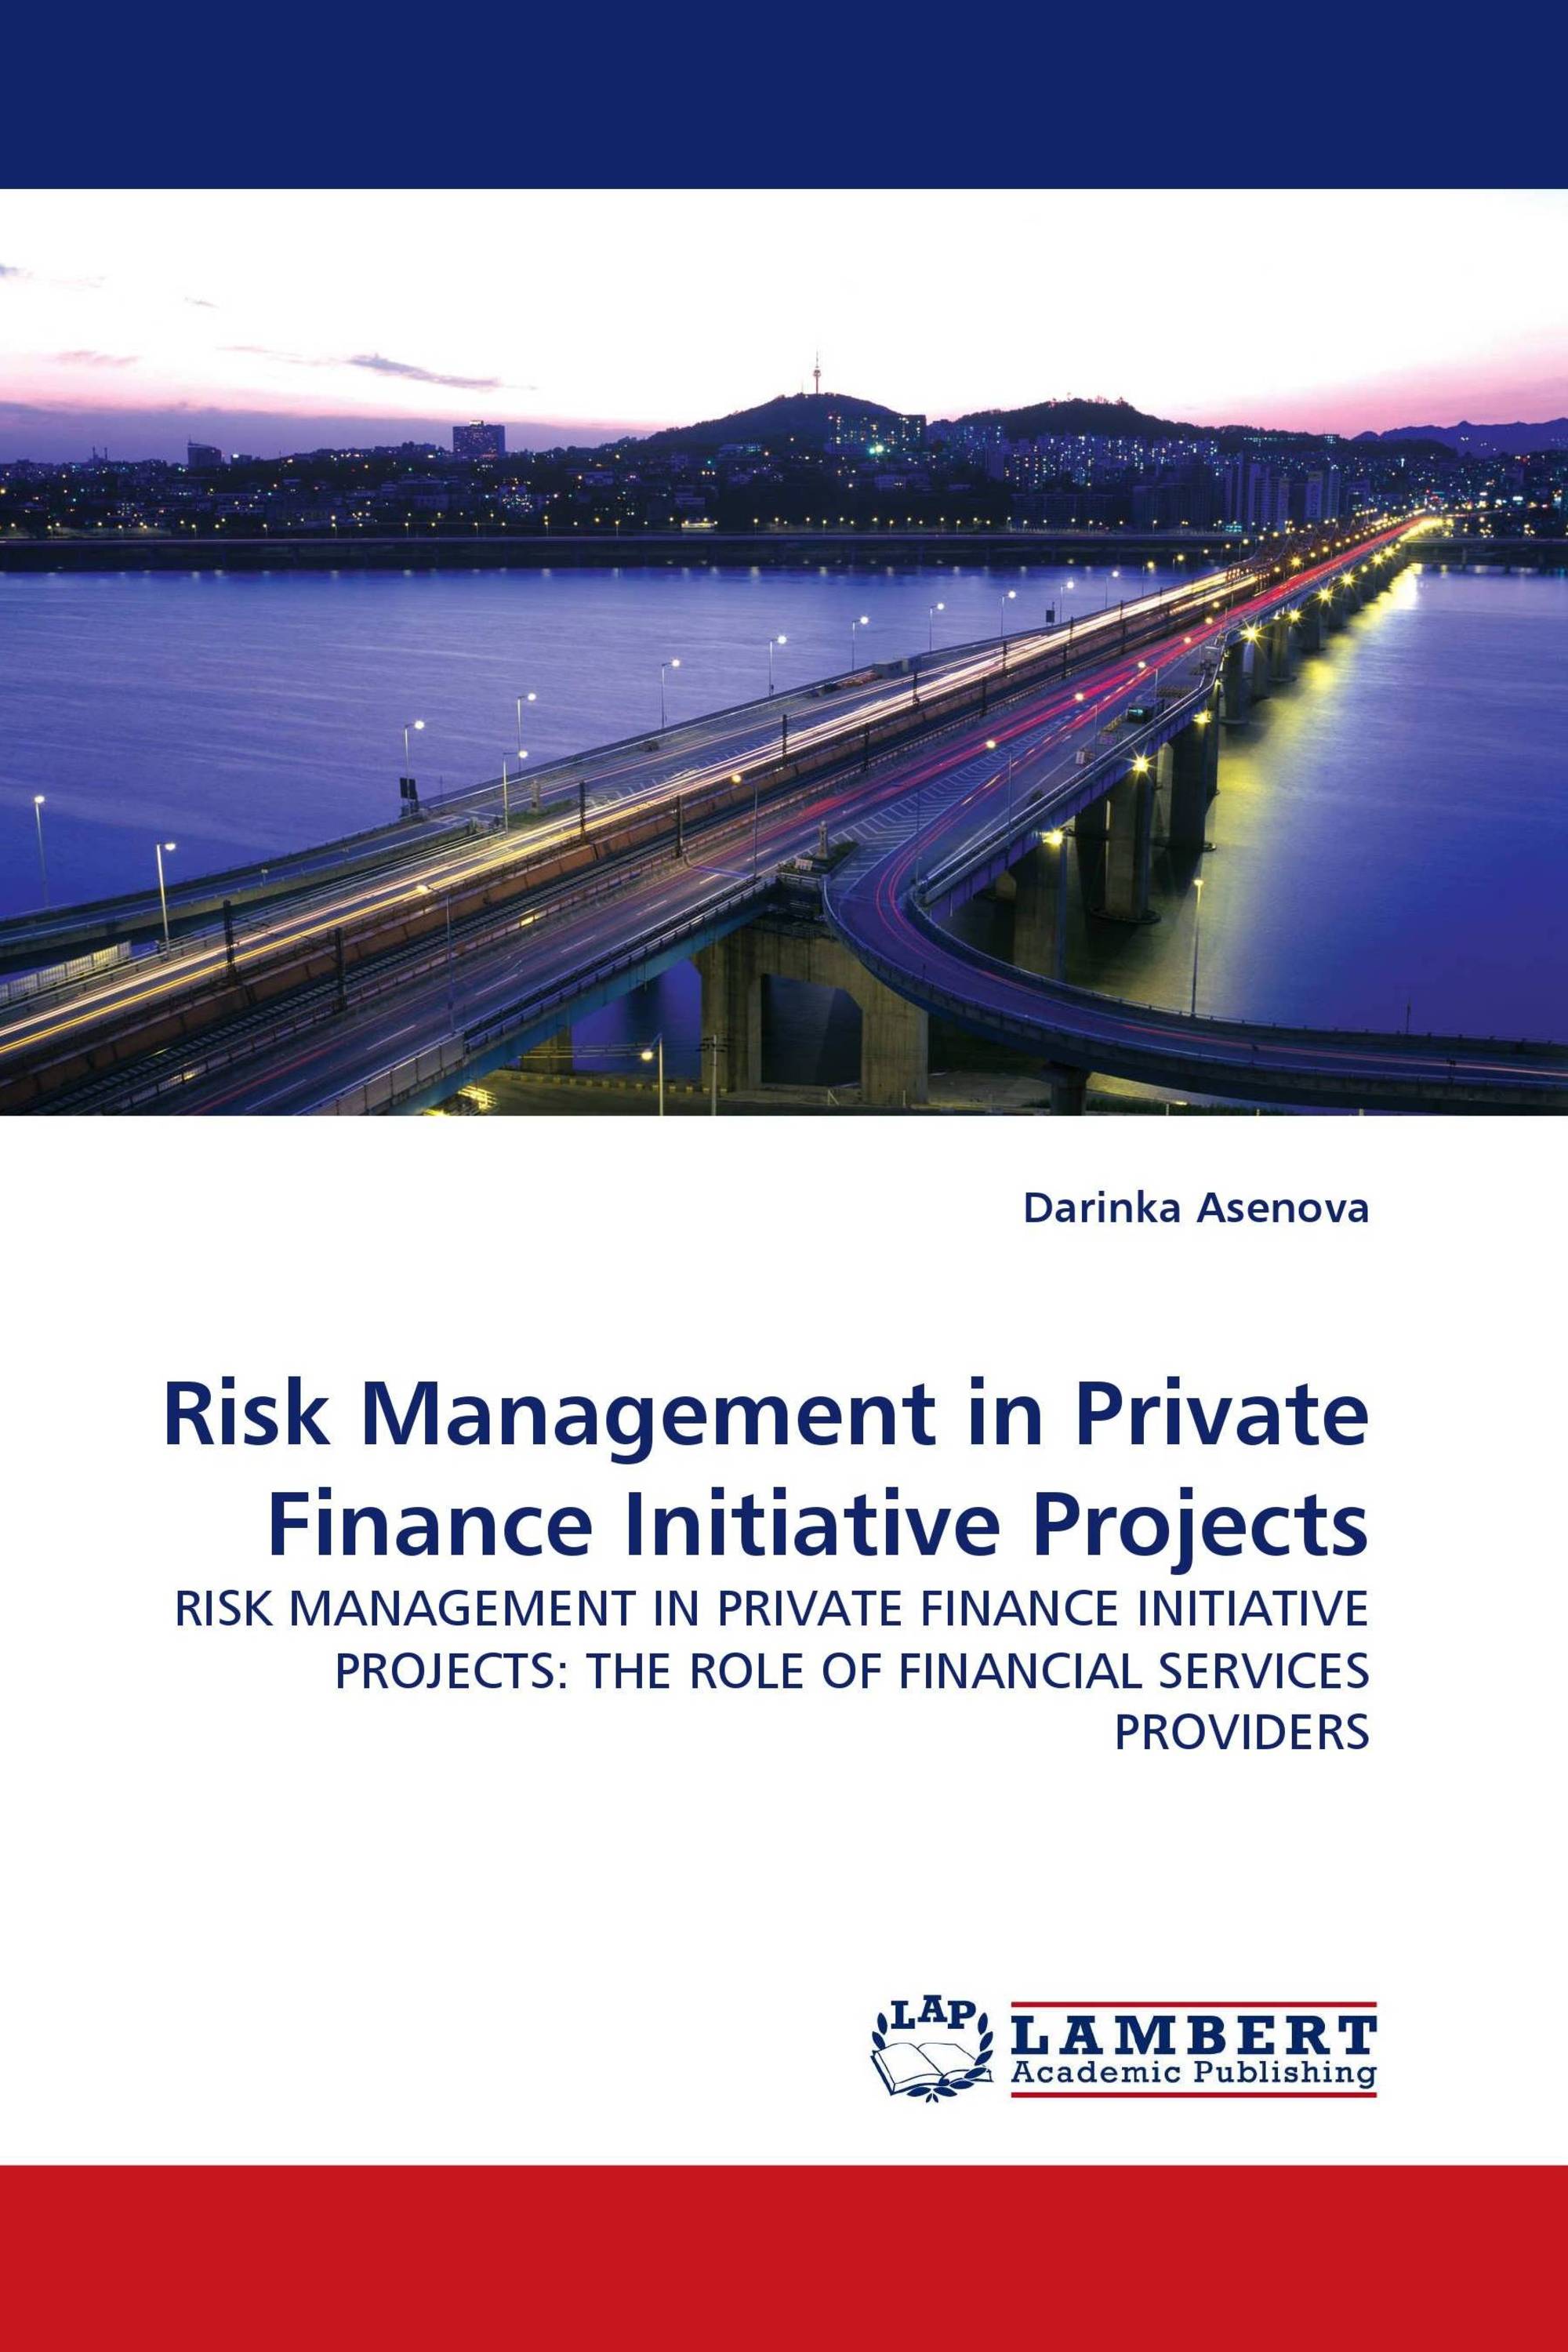 Risk Management in Private Finance Initiative Projects